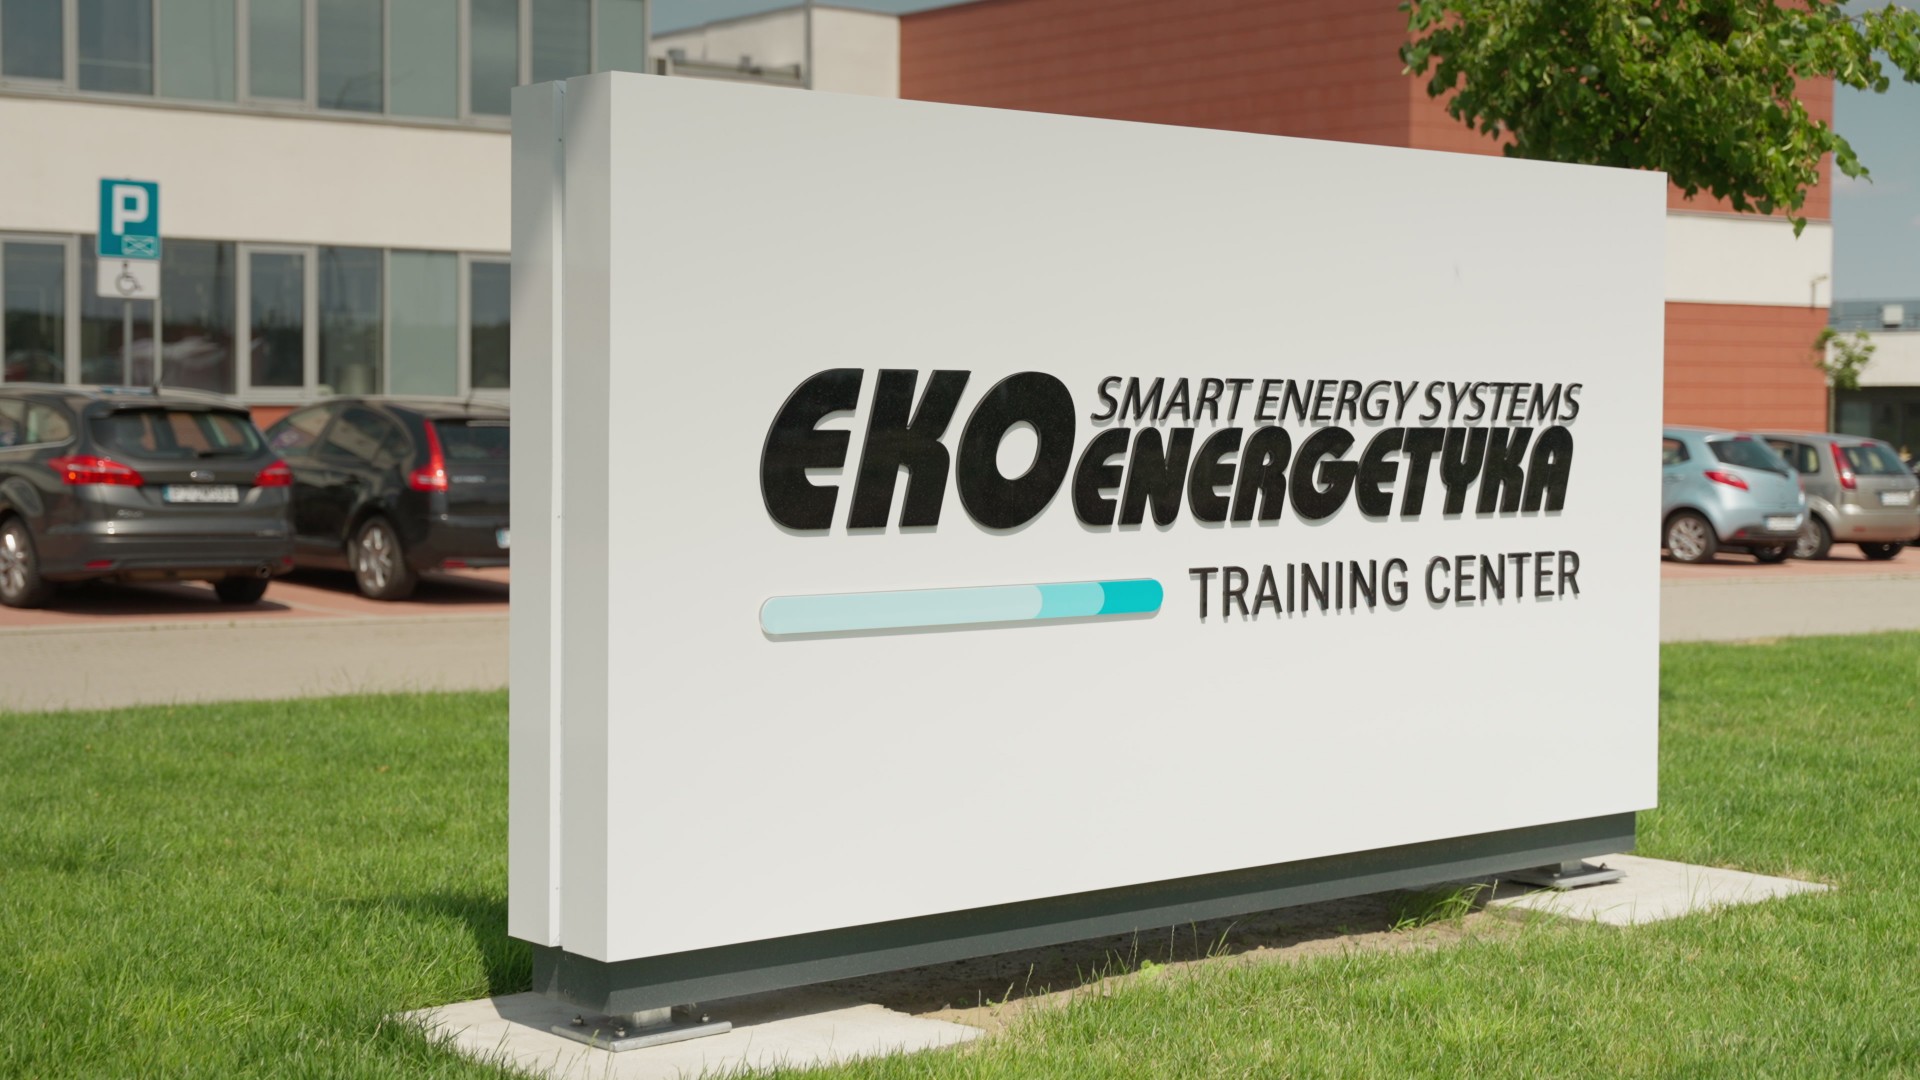 Ekoenergetyka Training Center – professional support for electromobility in your company